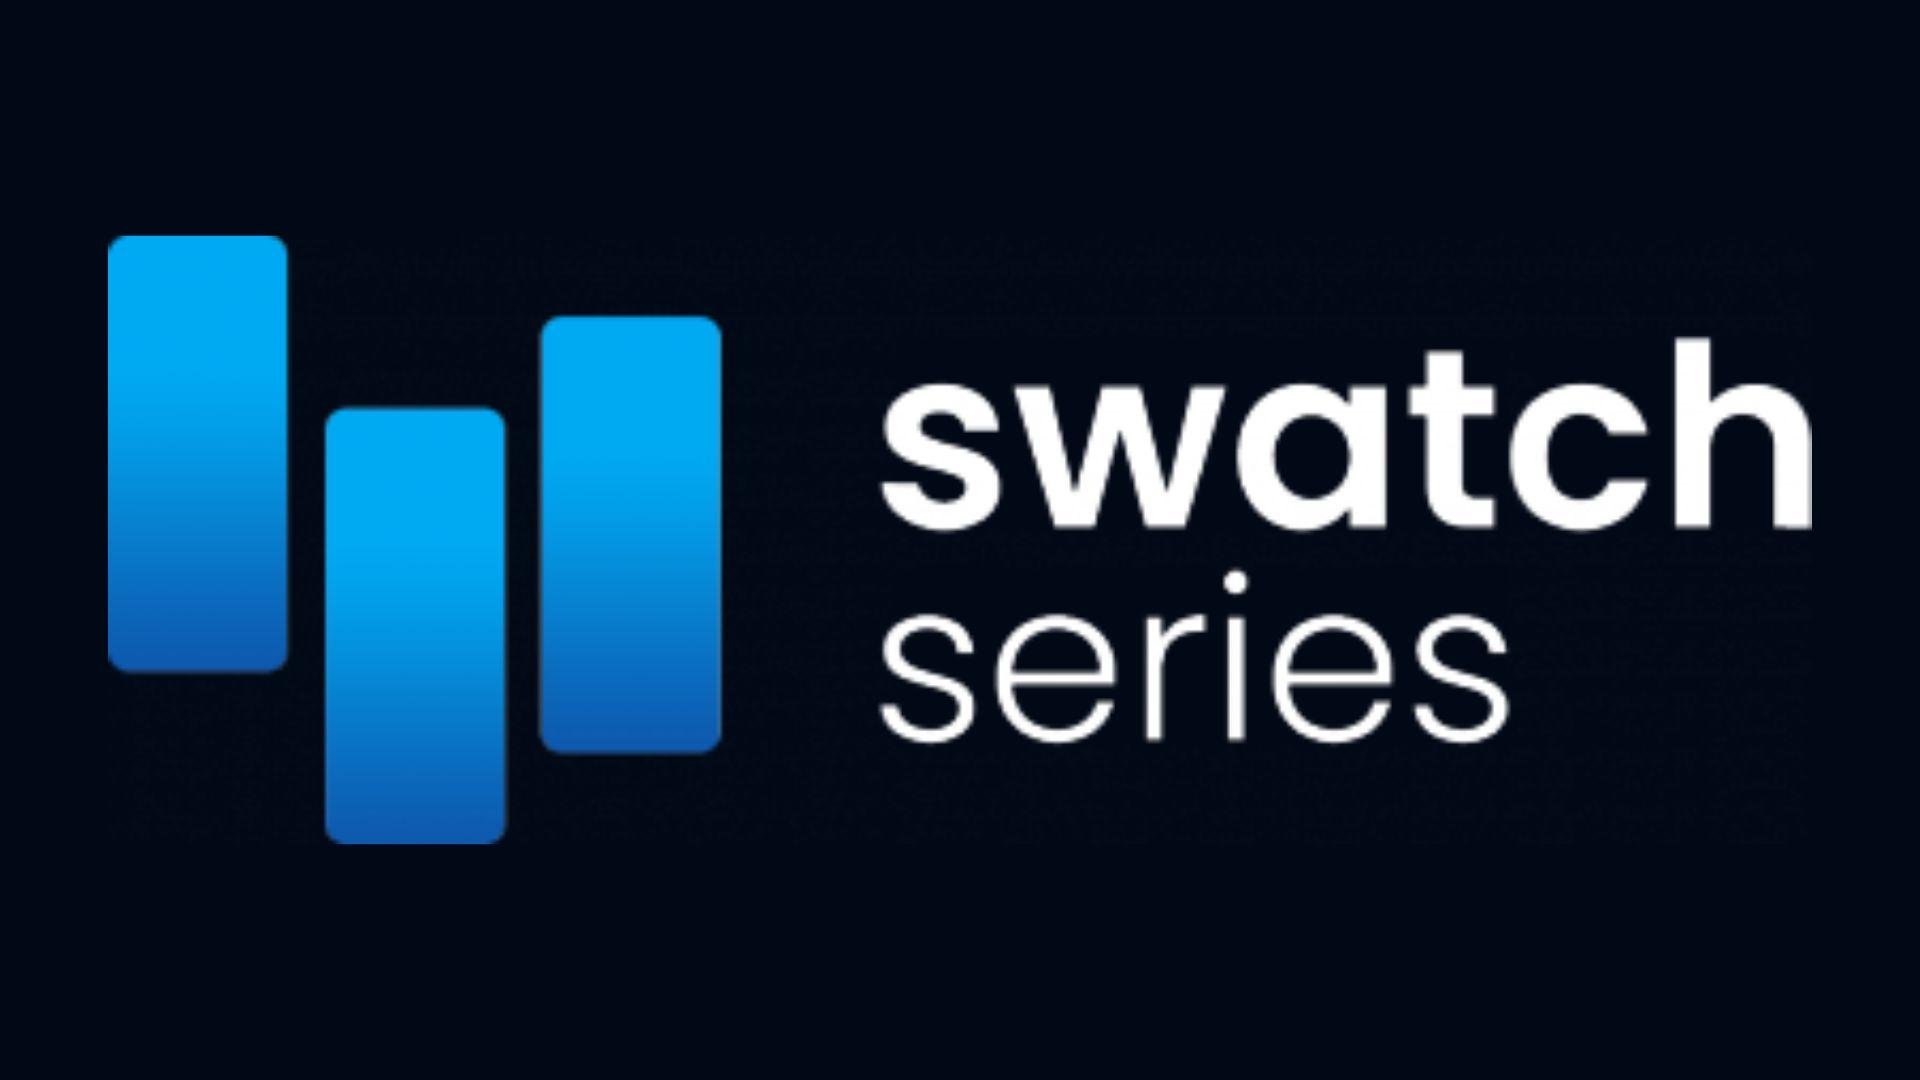 Introduction of SWatchSeries